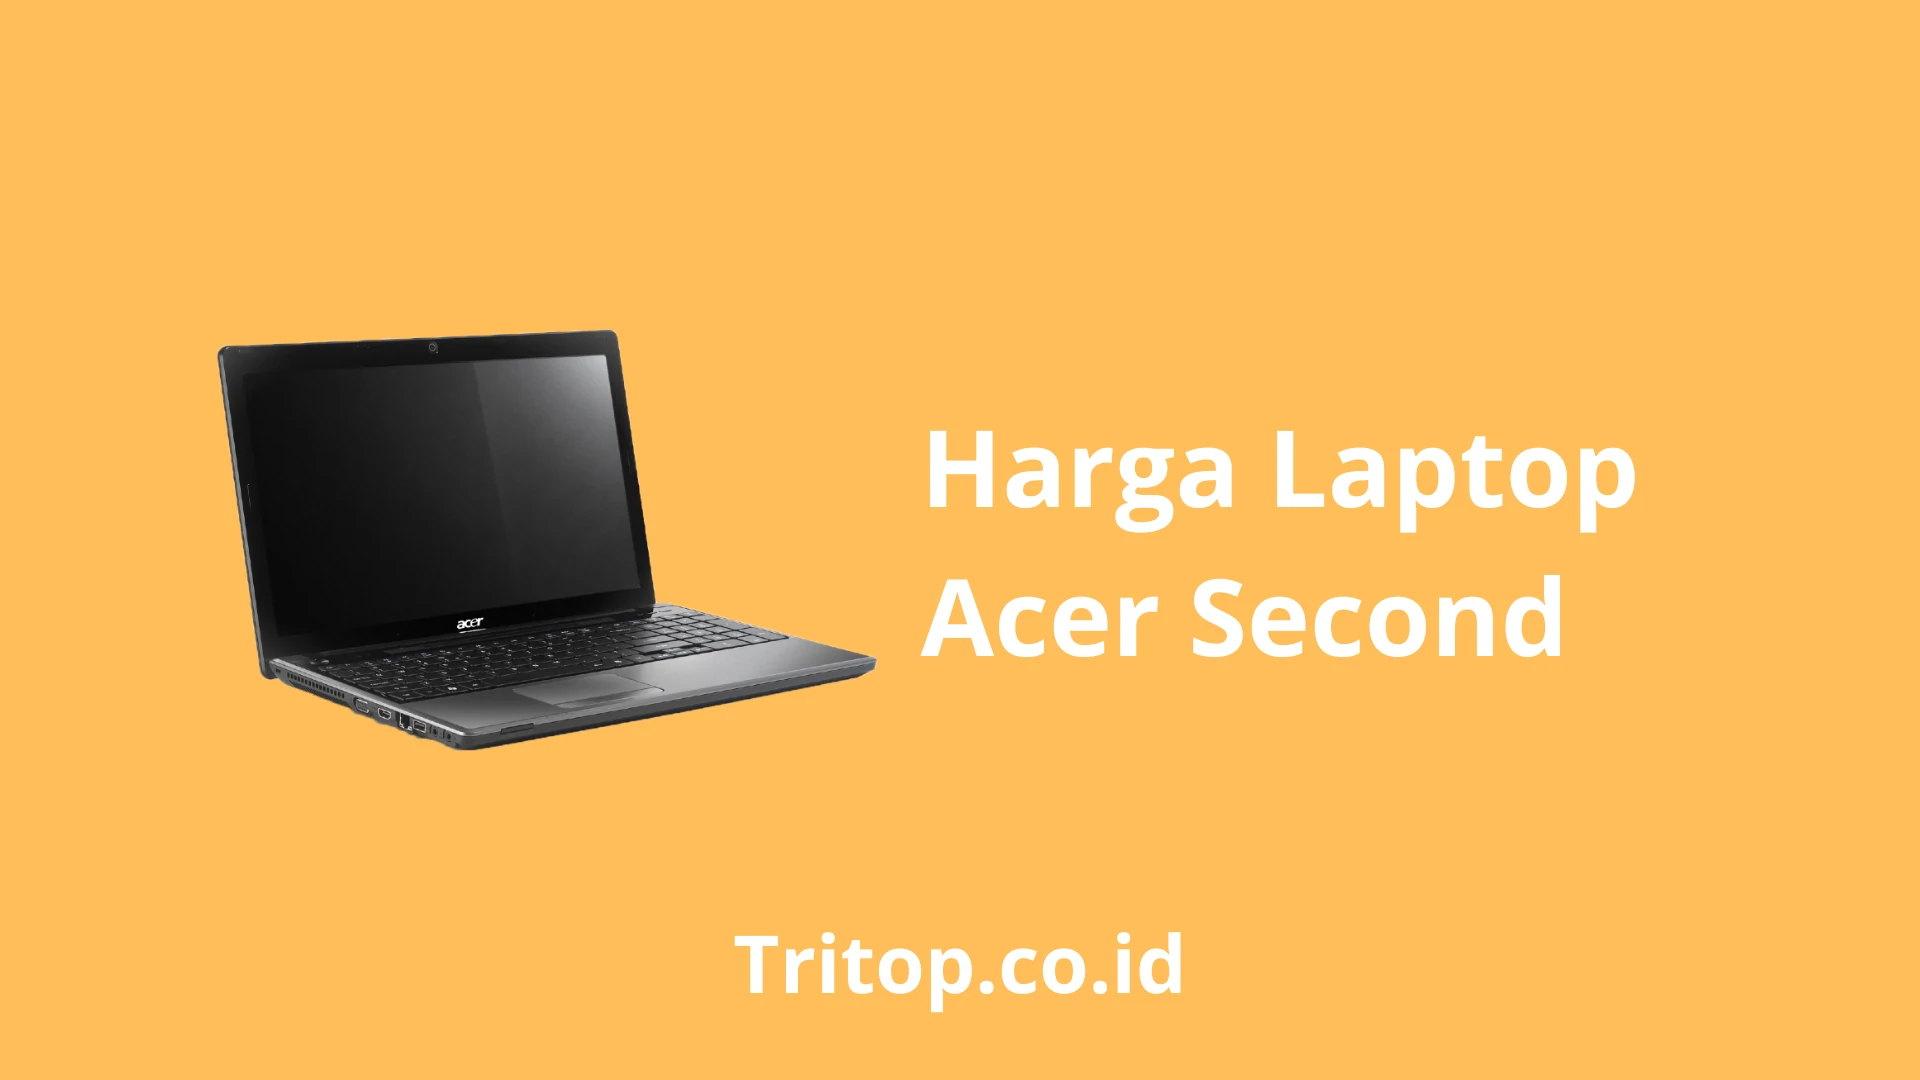 Harga Laptop Acer Second Tritop.co.id